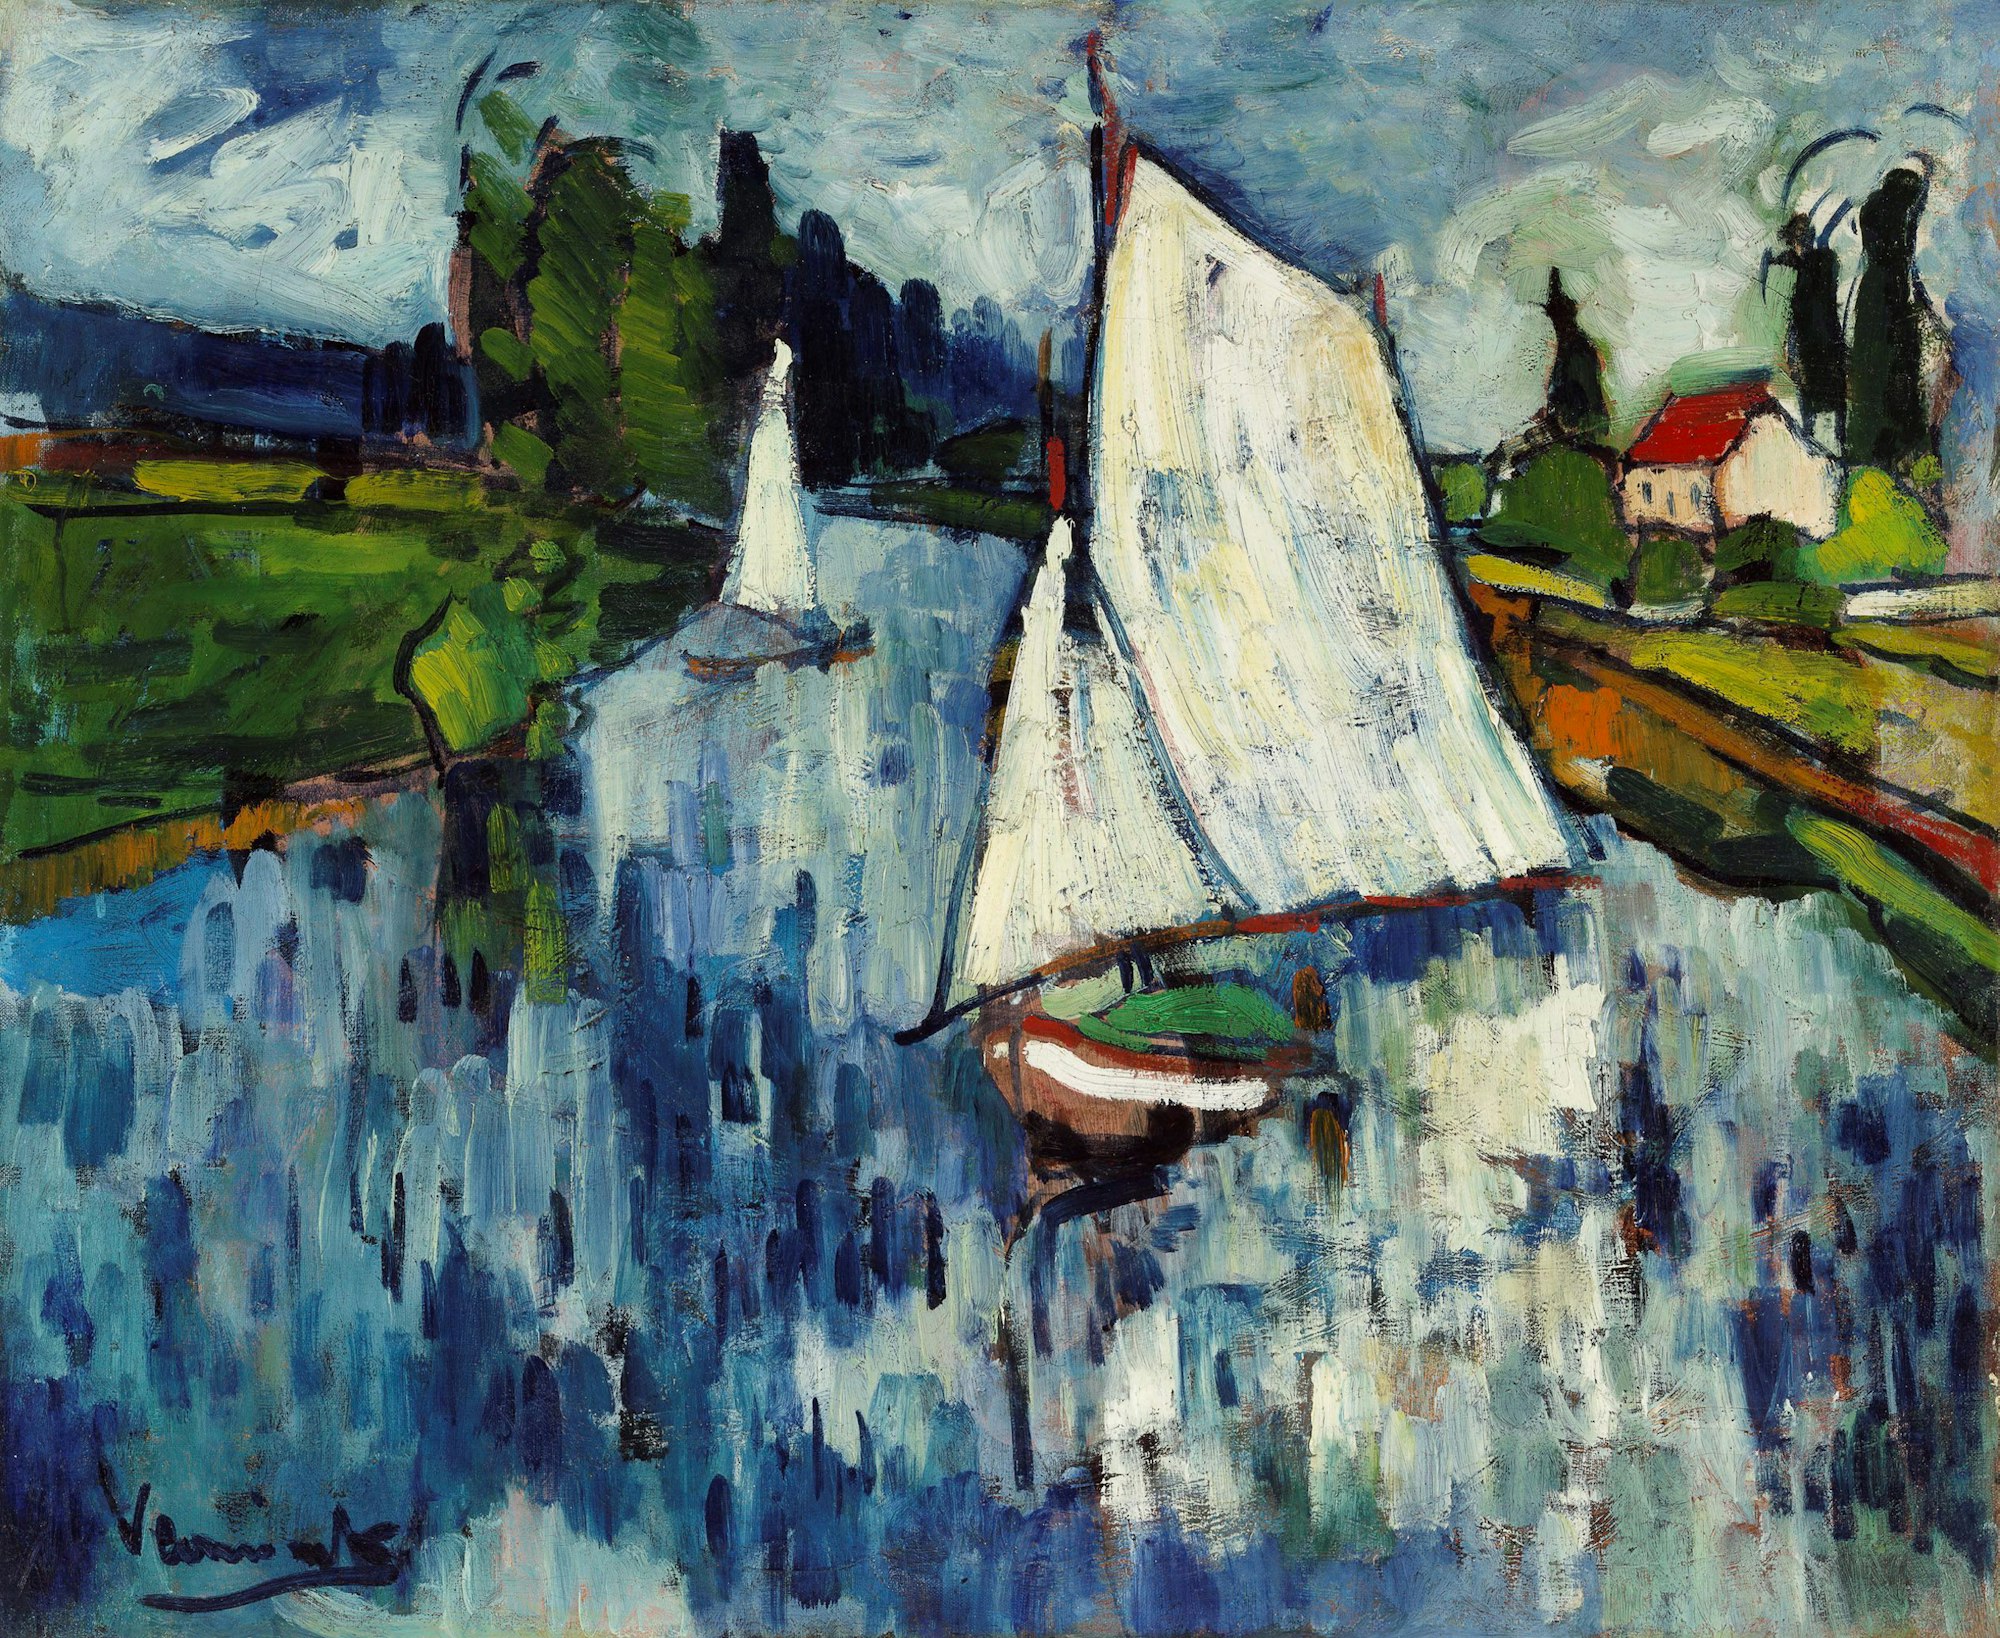 Maurice de Vlaminck Sailing boats at Chatou 1906  Art Gallery of New South Wales     Purchased with funds provided by the Art Gallery of New South Wales Foundation and the Margaret Hannah Olley Art Trust 2006  © Maurice de Vlaminck/ADAGP. Licensed by Copyright Agency  